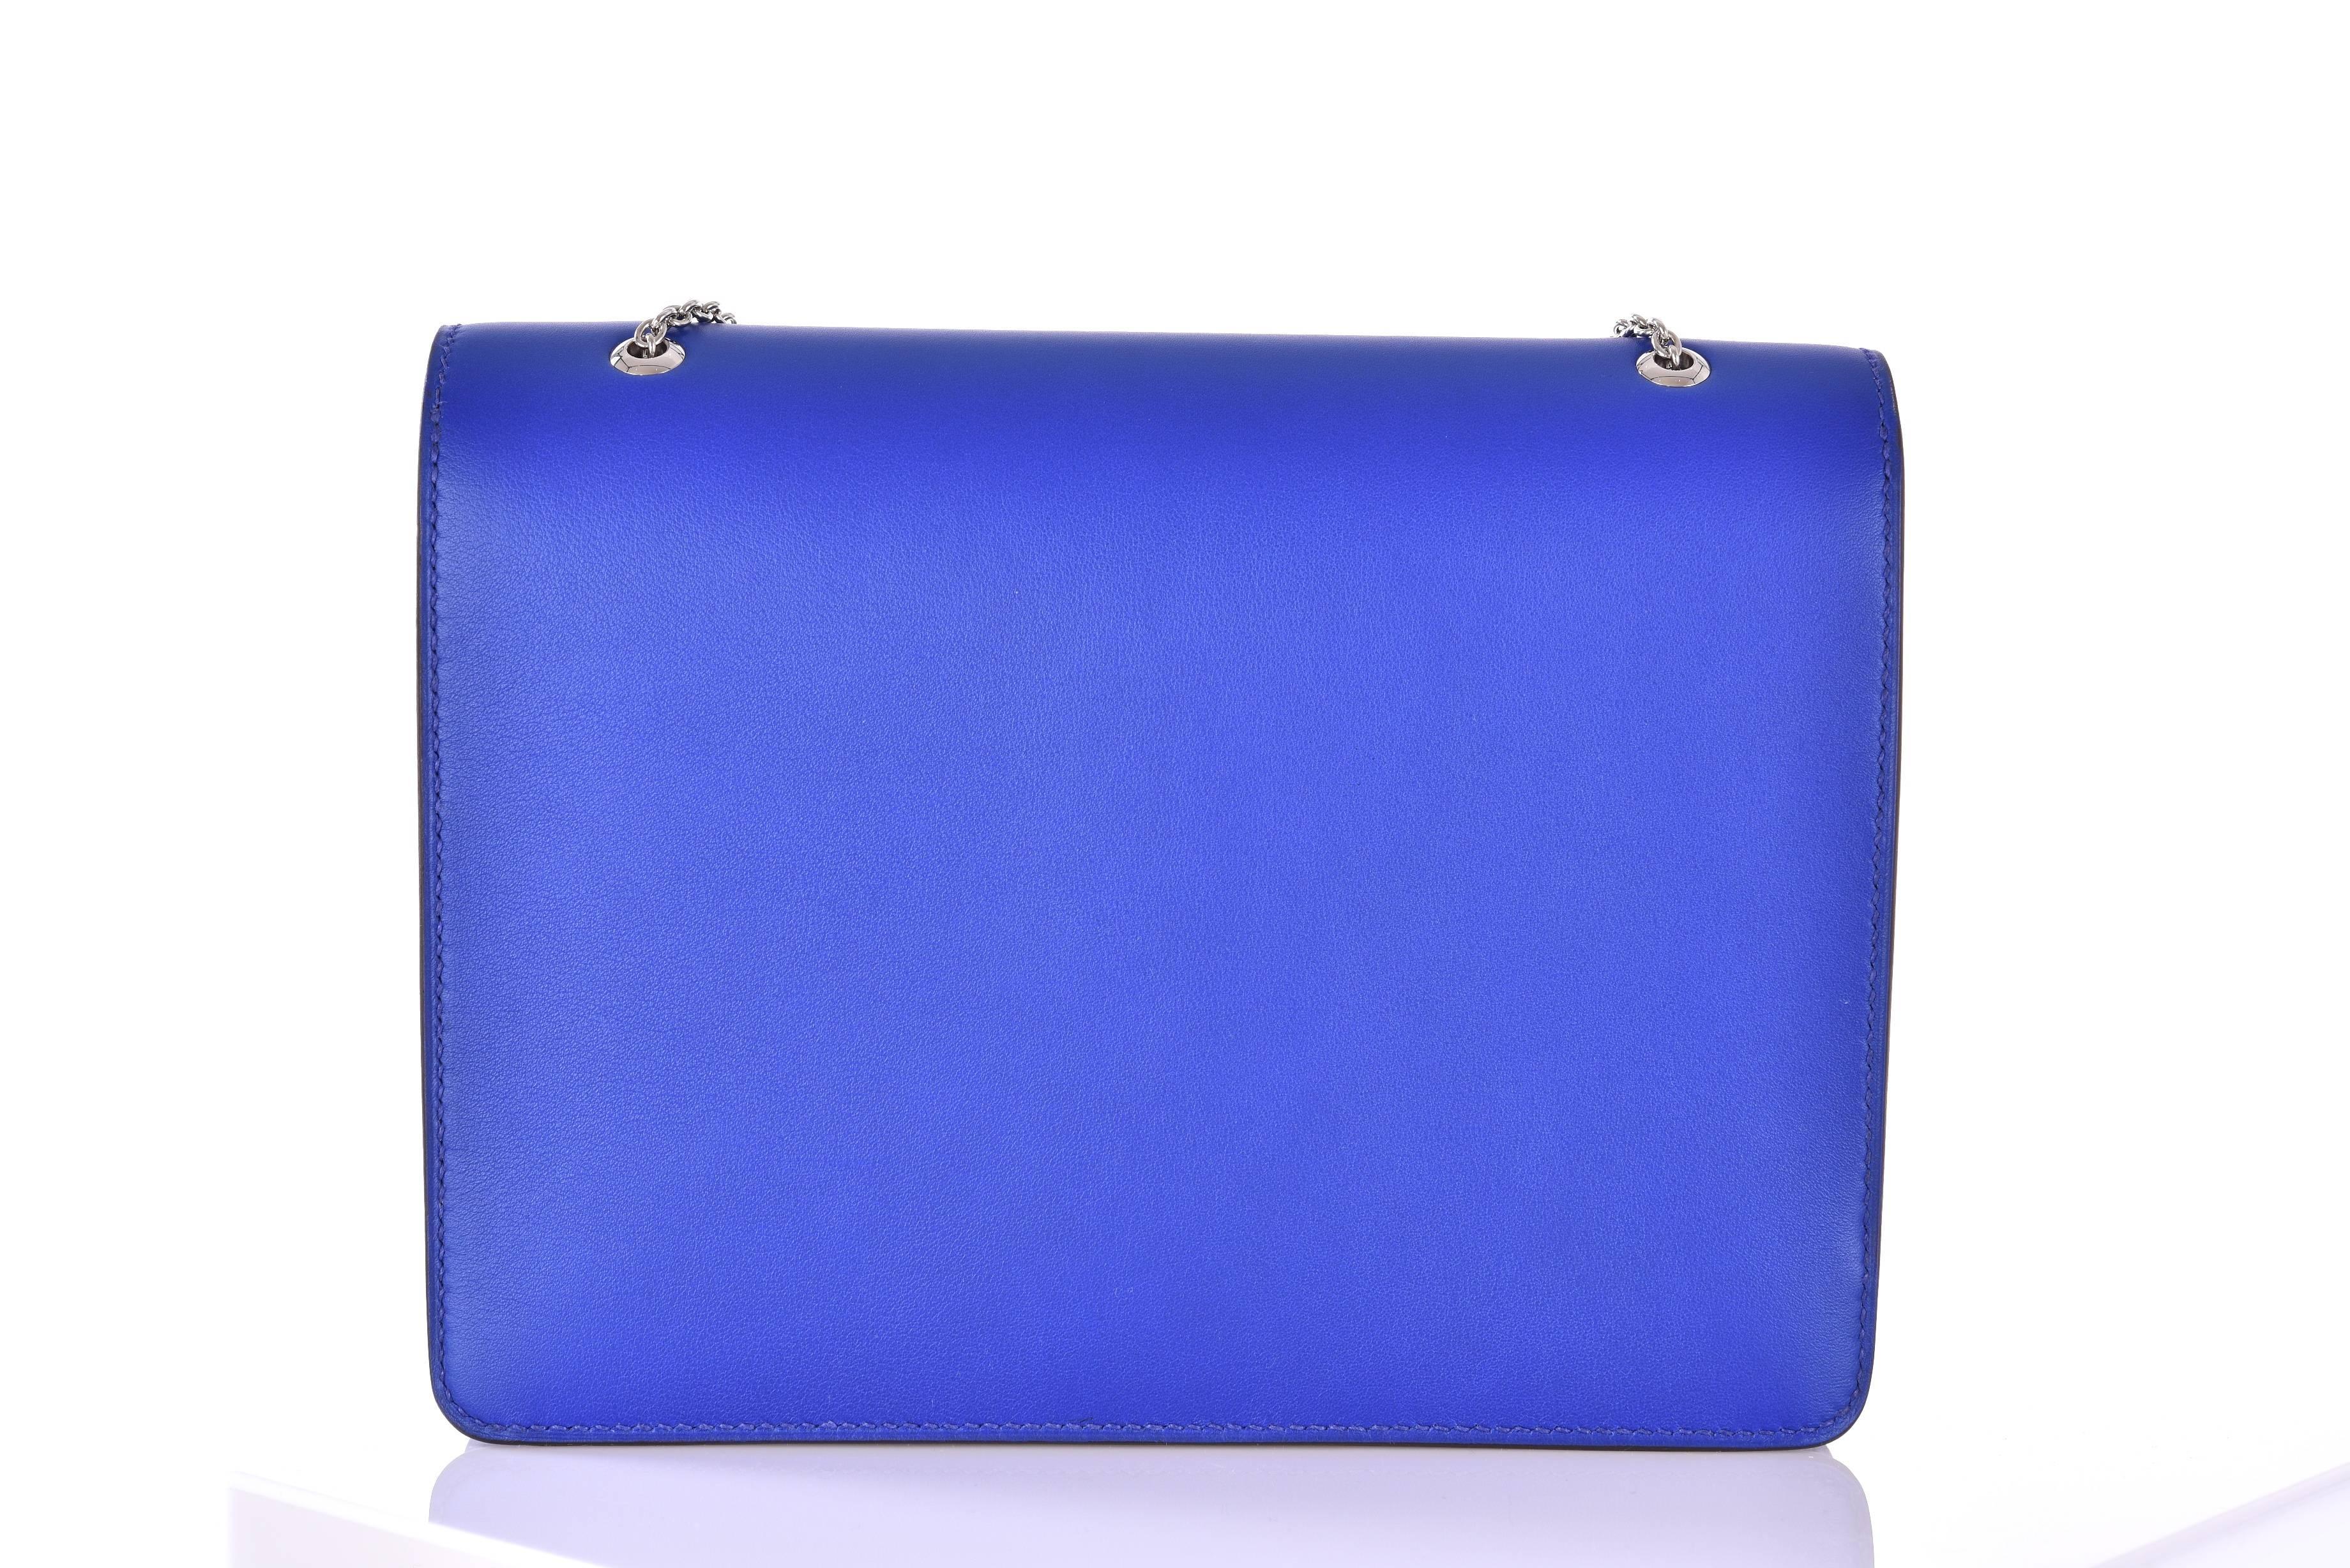 Hermes Catenina Bag Clutch Blue Electric Gorgeous New Bag! JaneFinds 4